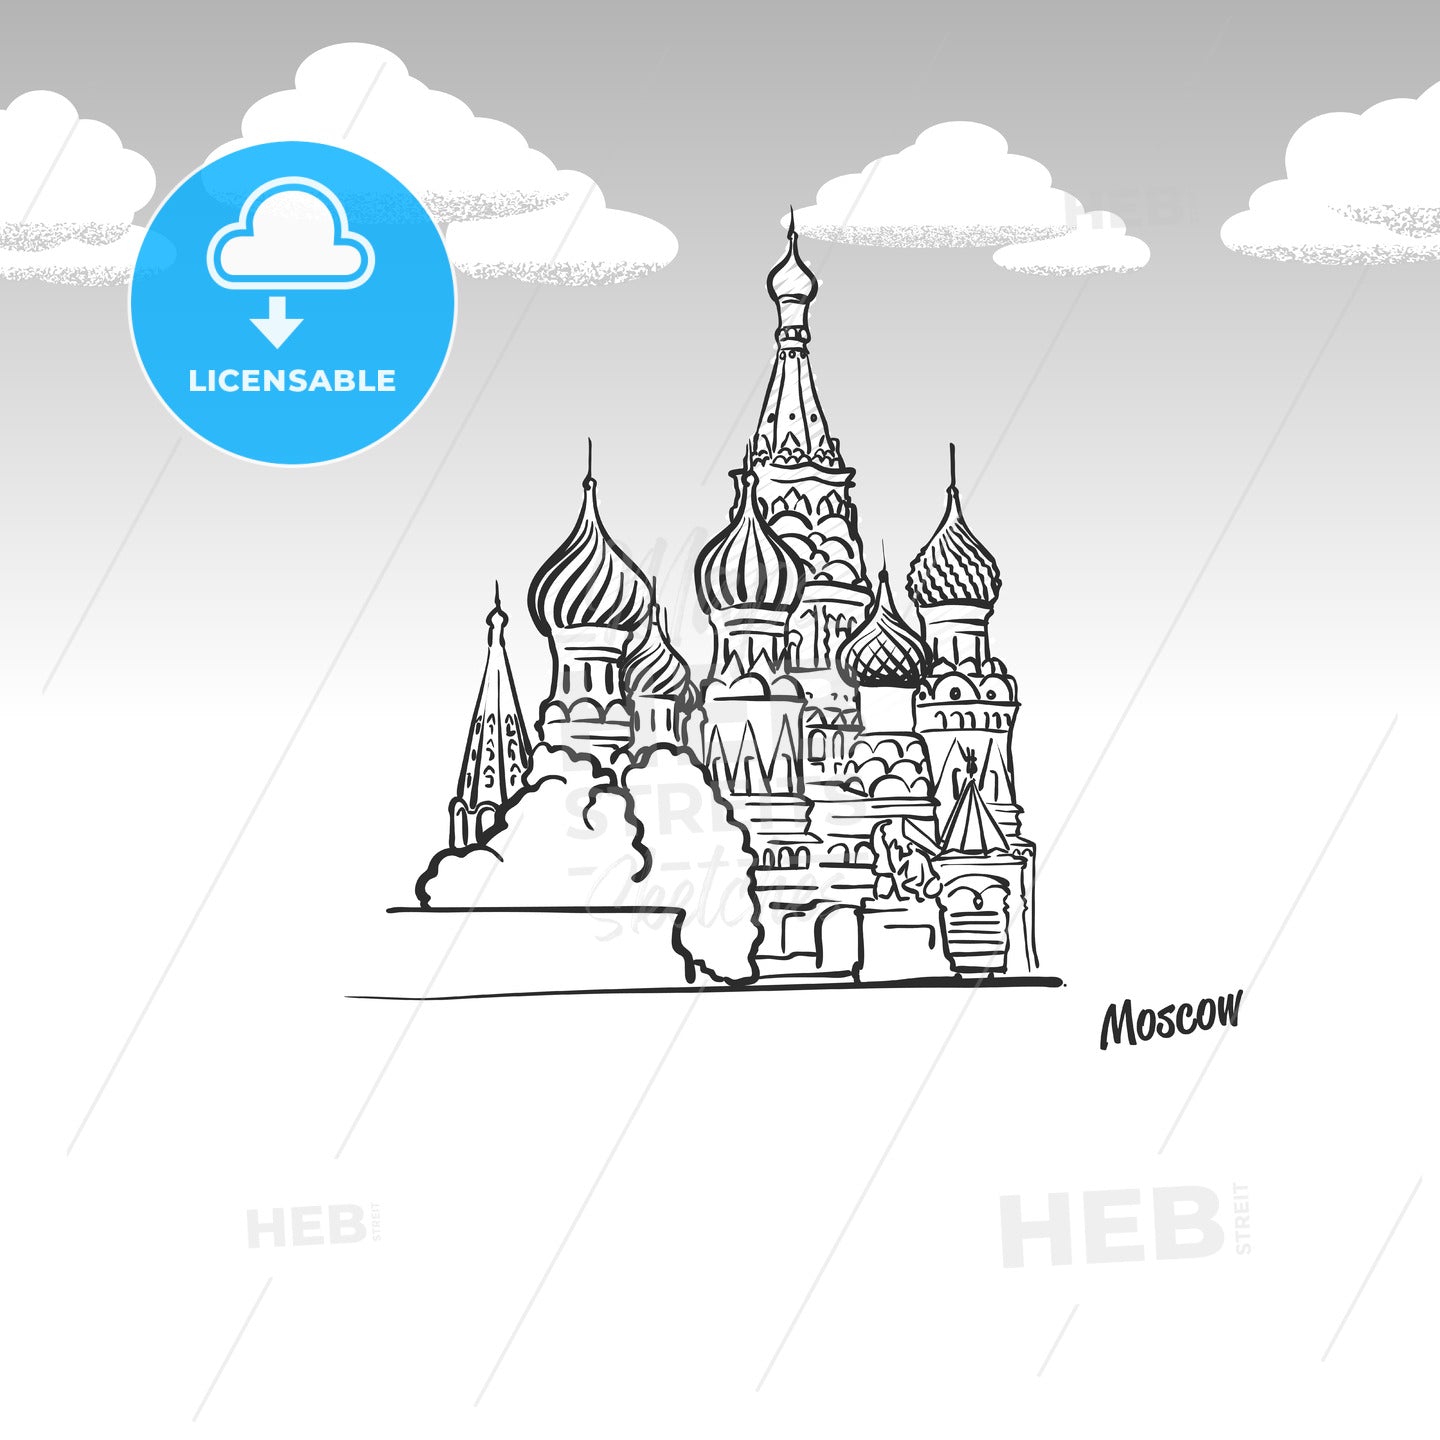 Moscow, Russia famous landmark sketch – instant download